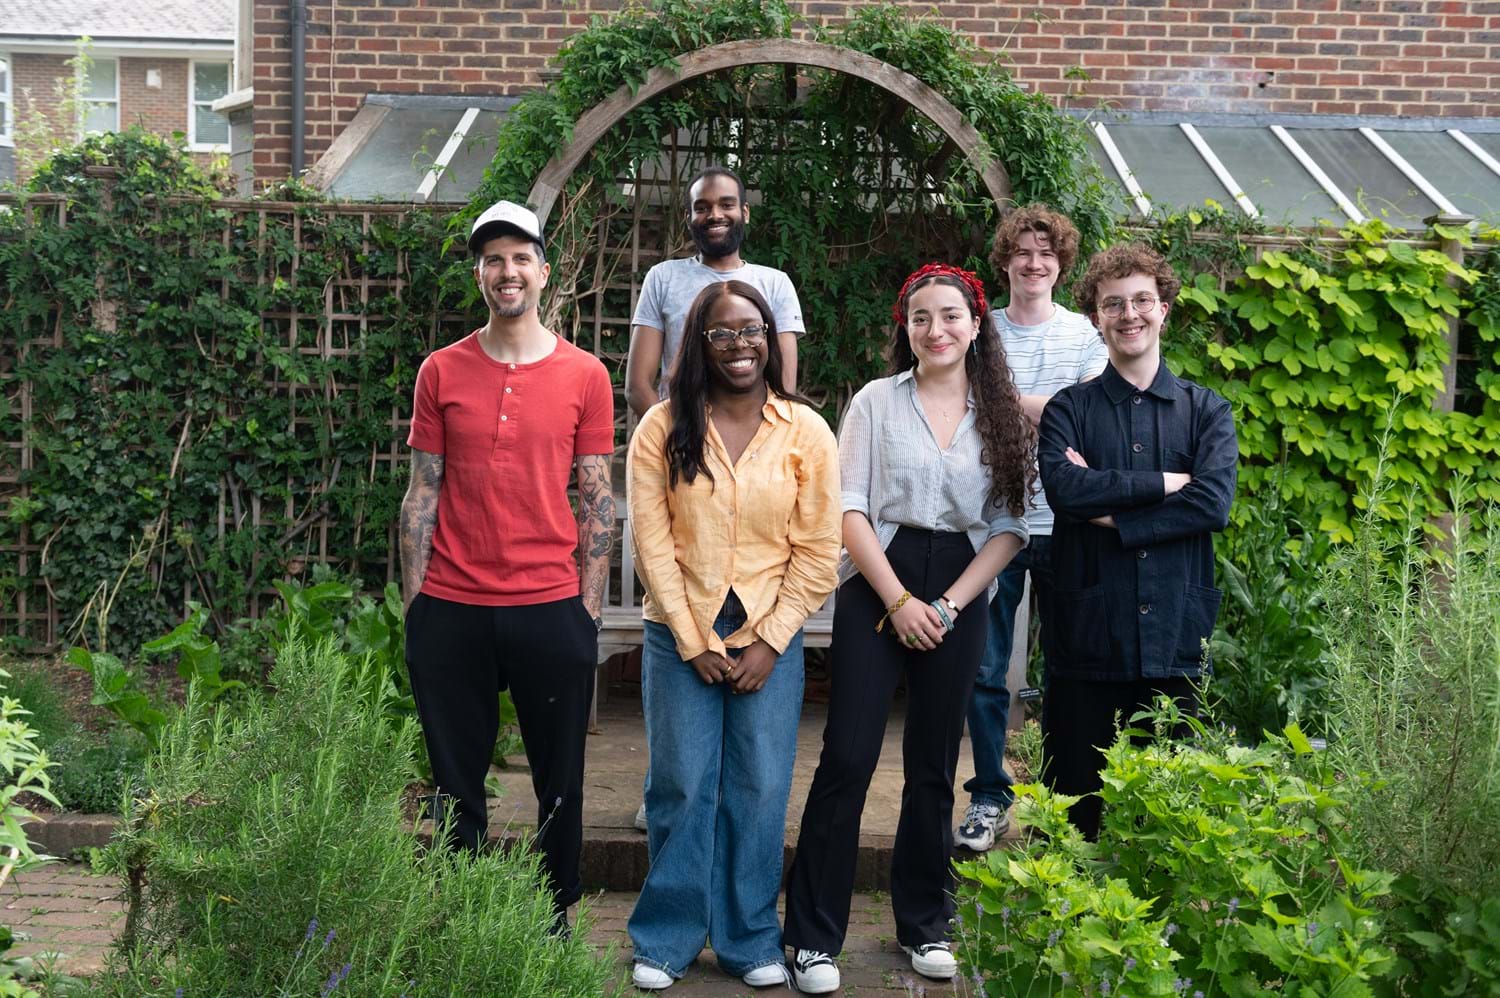 A group of young people standing in a garden smiling